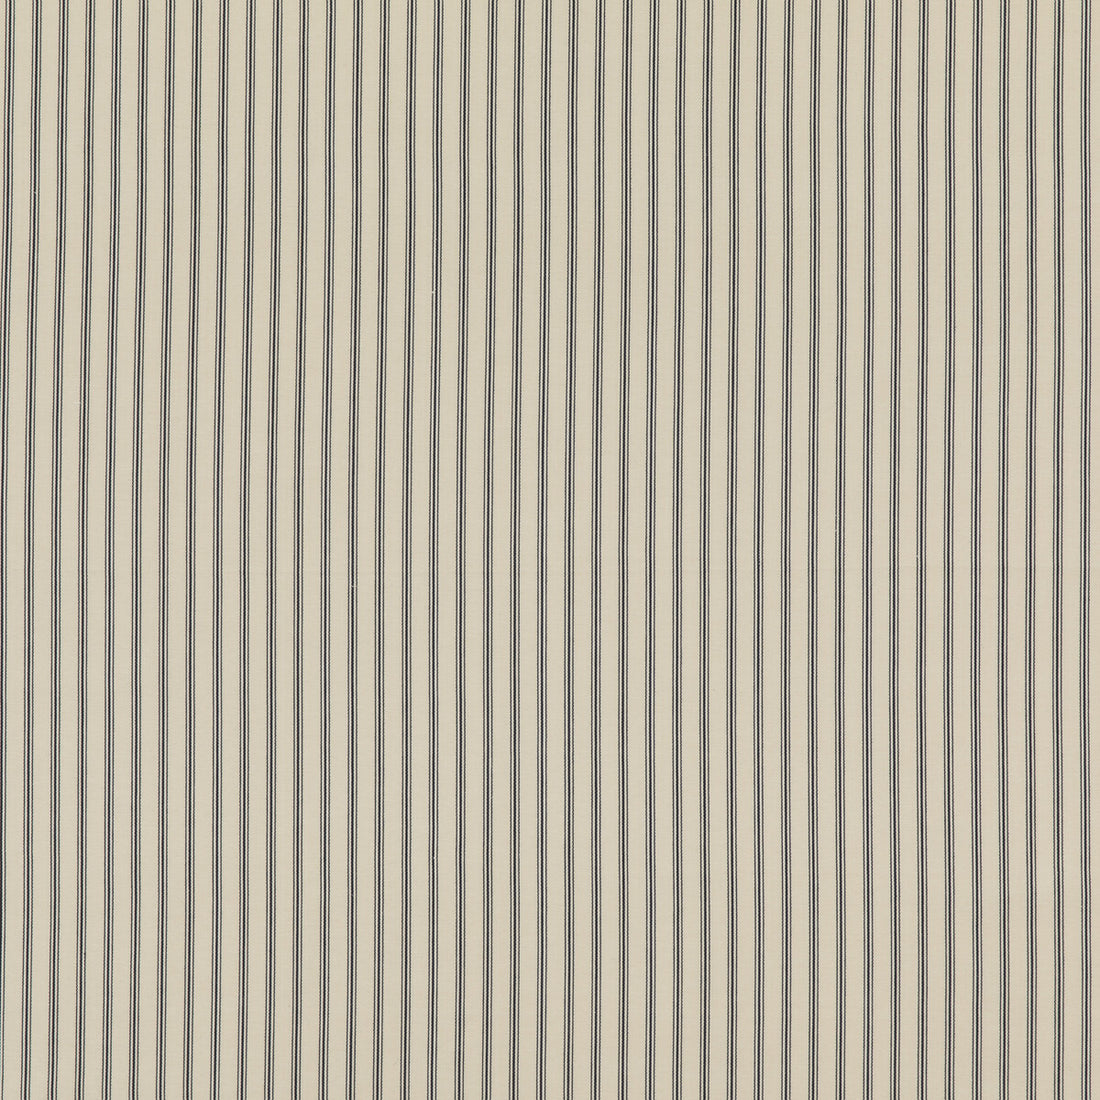 Renwick fabric in midnight color - pattern ED85300.690.0 - by Threads in the Great Stripes collection